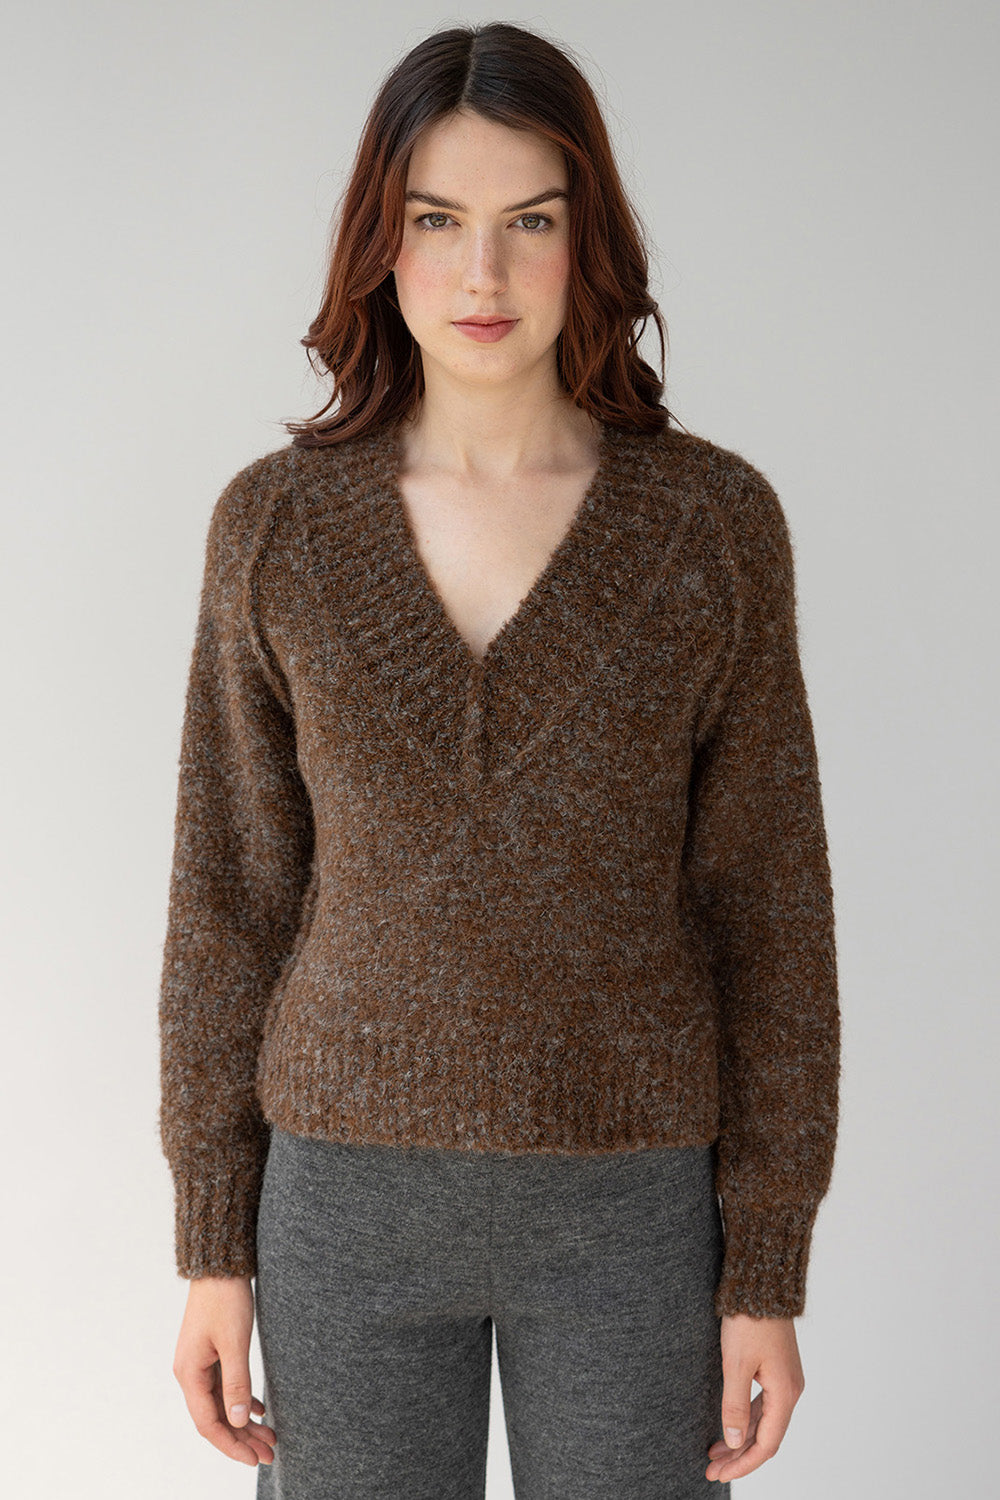 Grey maple alpaca pullover features a low v in front knitted in soft texture boucle yarn